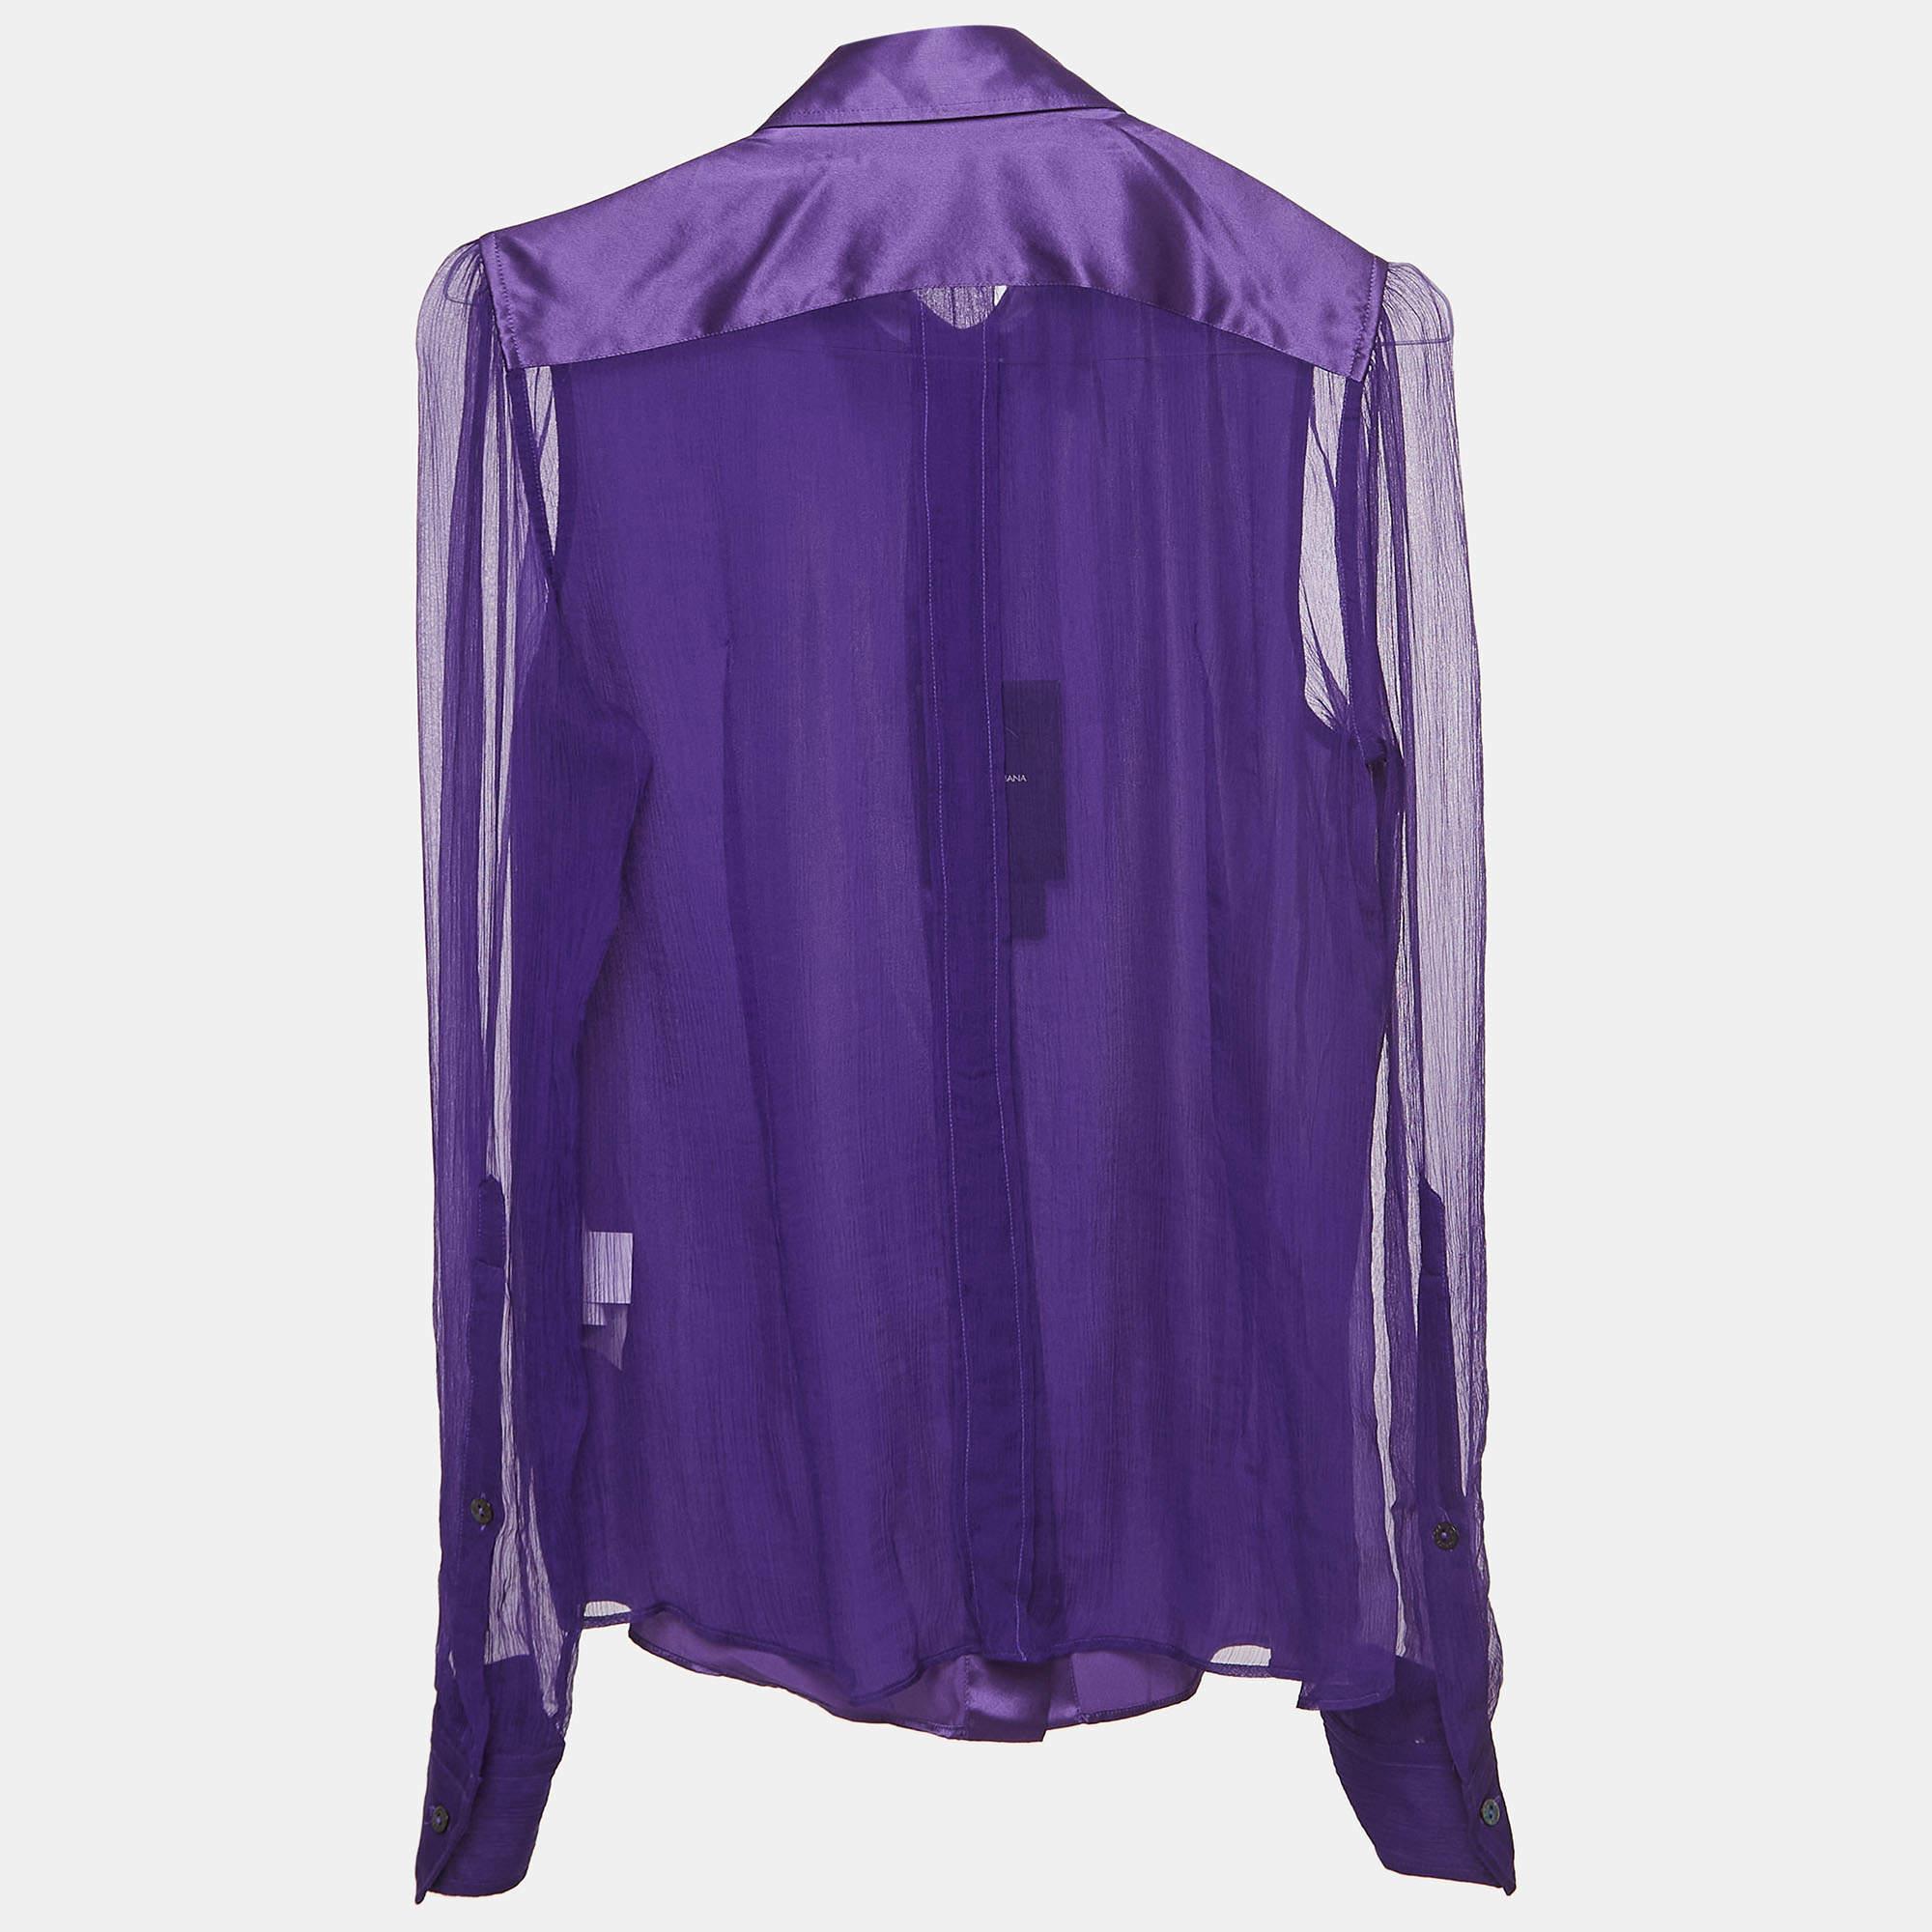 The Dolce & Gabbana shirt is a luxurious piece, crafted from sumptuous silk. This elegant piece features semi-sheer sleeves, adding a touch of sophistication. The rich purple hue enhances its allure, making it a timeless and versatile wardrobe